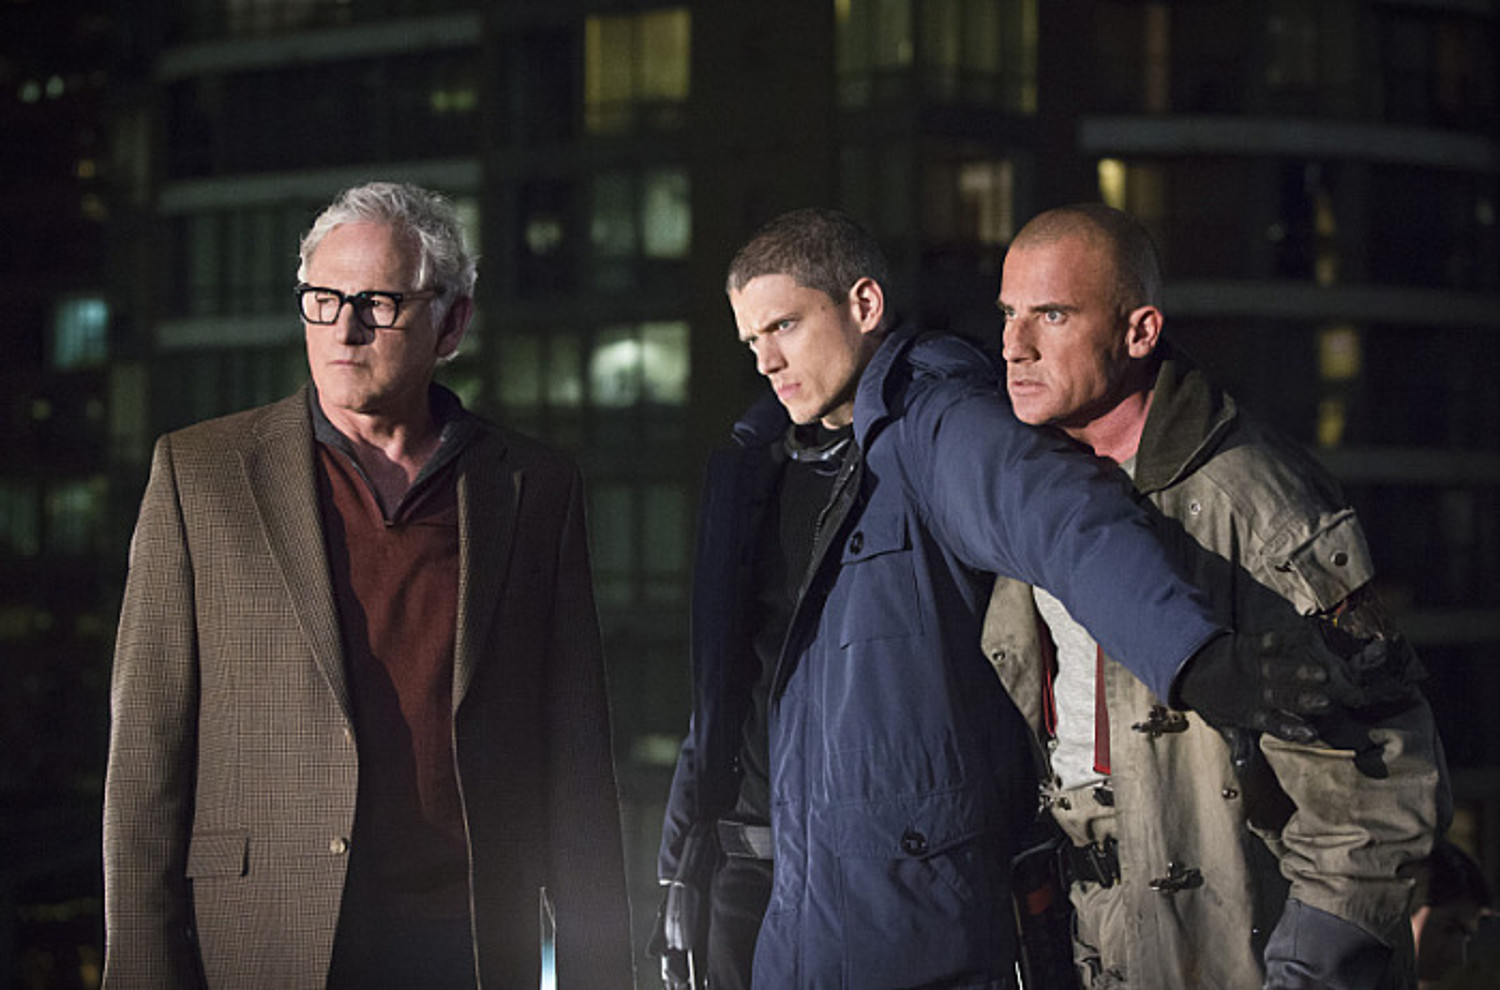 DC's Legends of Tomorrow -- "Pilot, Part 1" -- Image LGN101d_0118b -- Pictured (L-R): Victor Garber as Professor Martin Stein, Wentworth Miller as Leonard Snart/Captain Cold and Dominic Purcell as Mick Rory/Heatwave -- Photo: Jeff Weddell/The CW -- ÃÂ© 2015 The CW Network, LLC. All Rights Reserved.